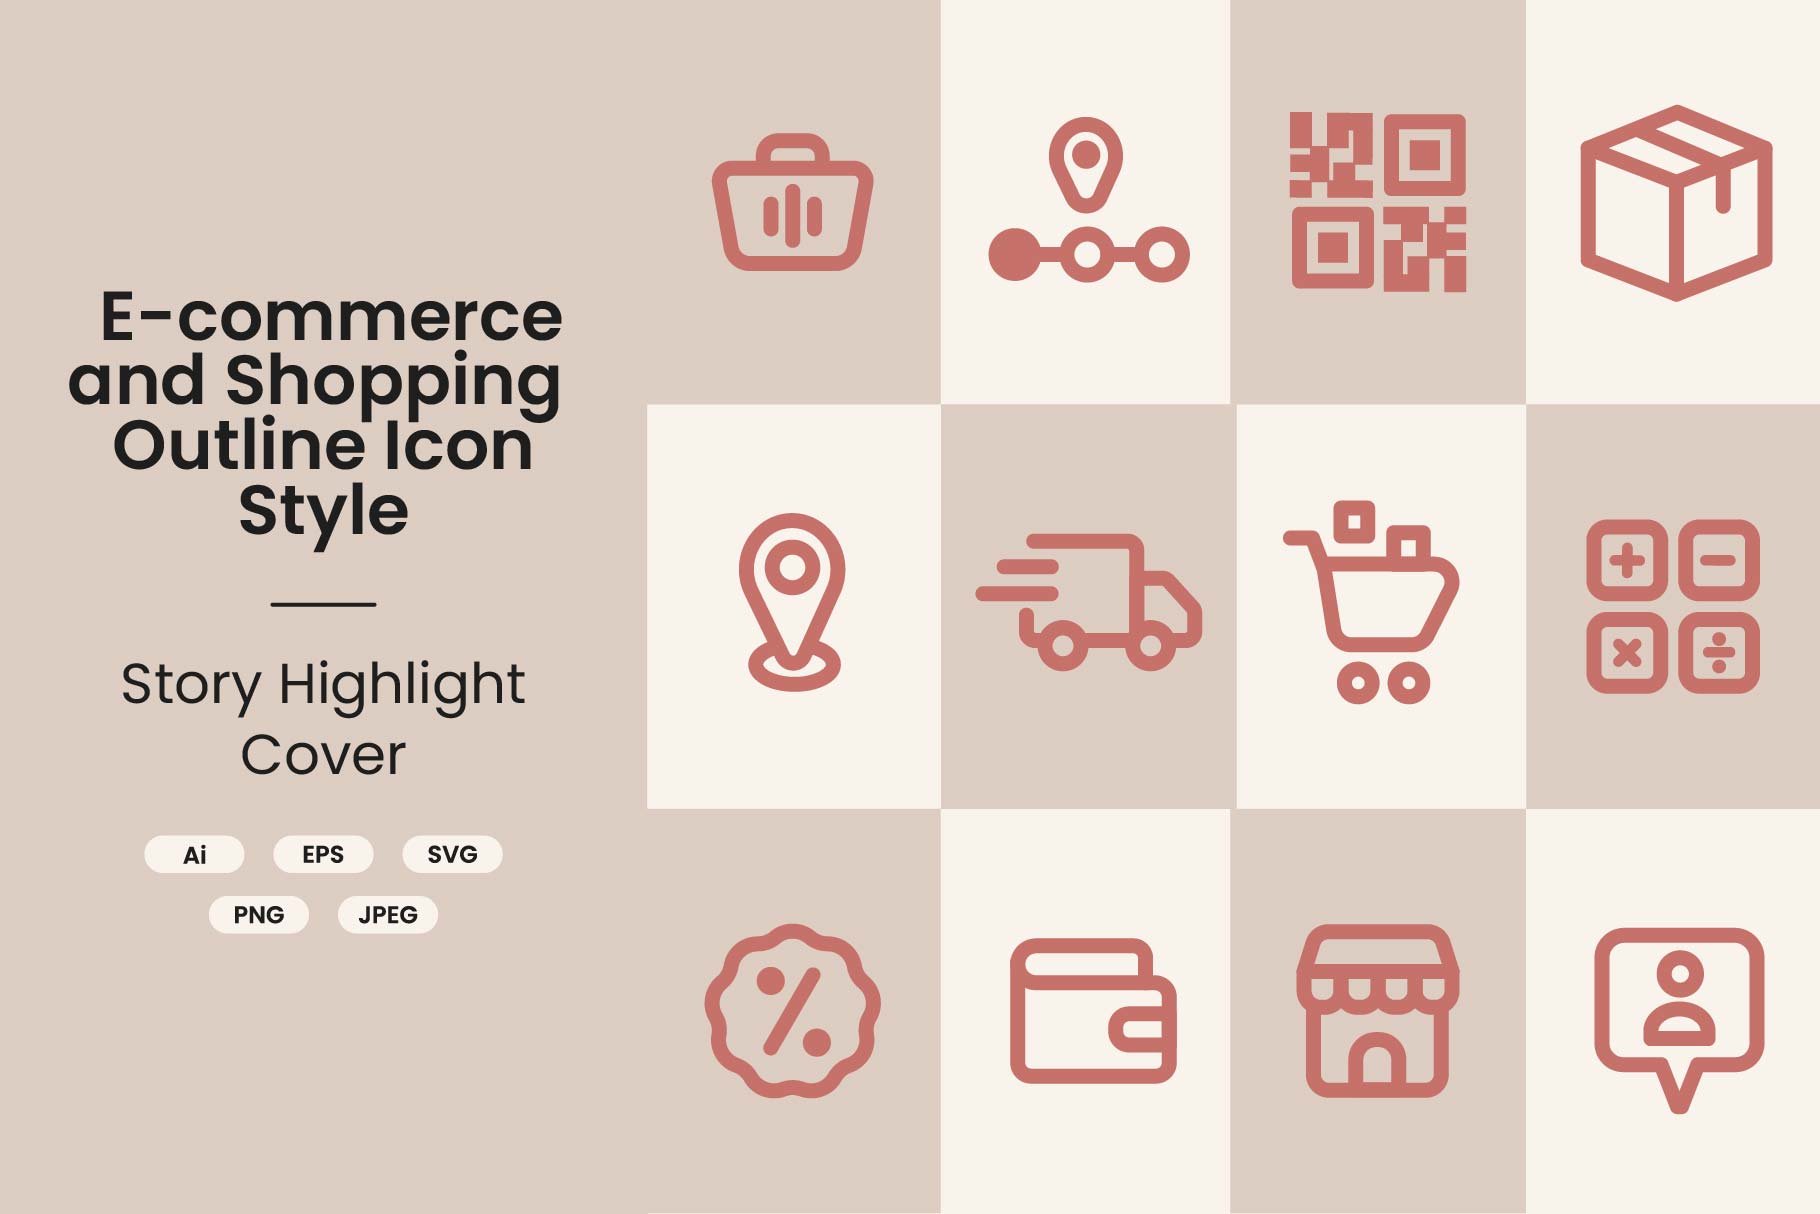 E-commerce Outline Icon Style cover image.